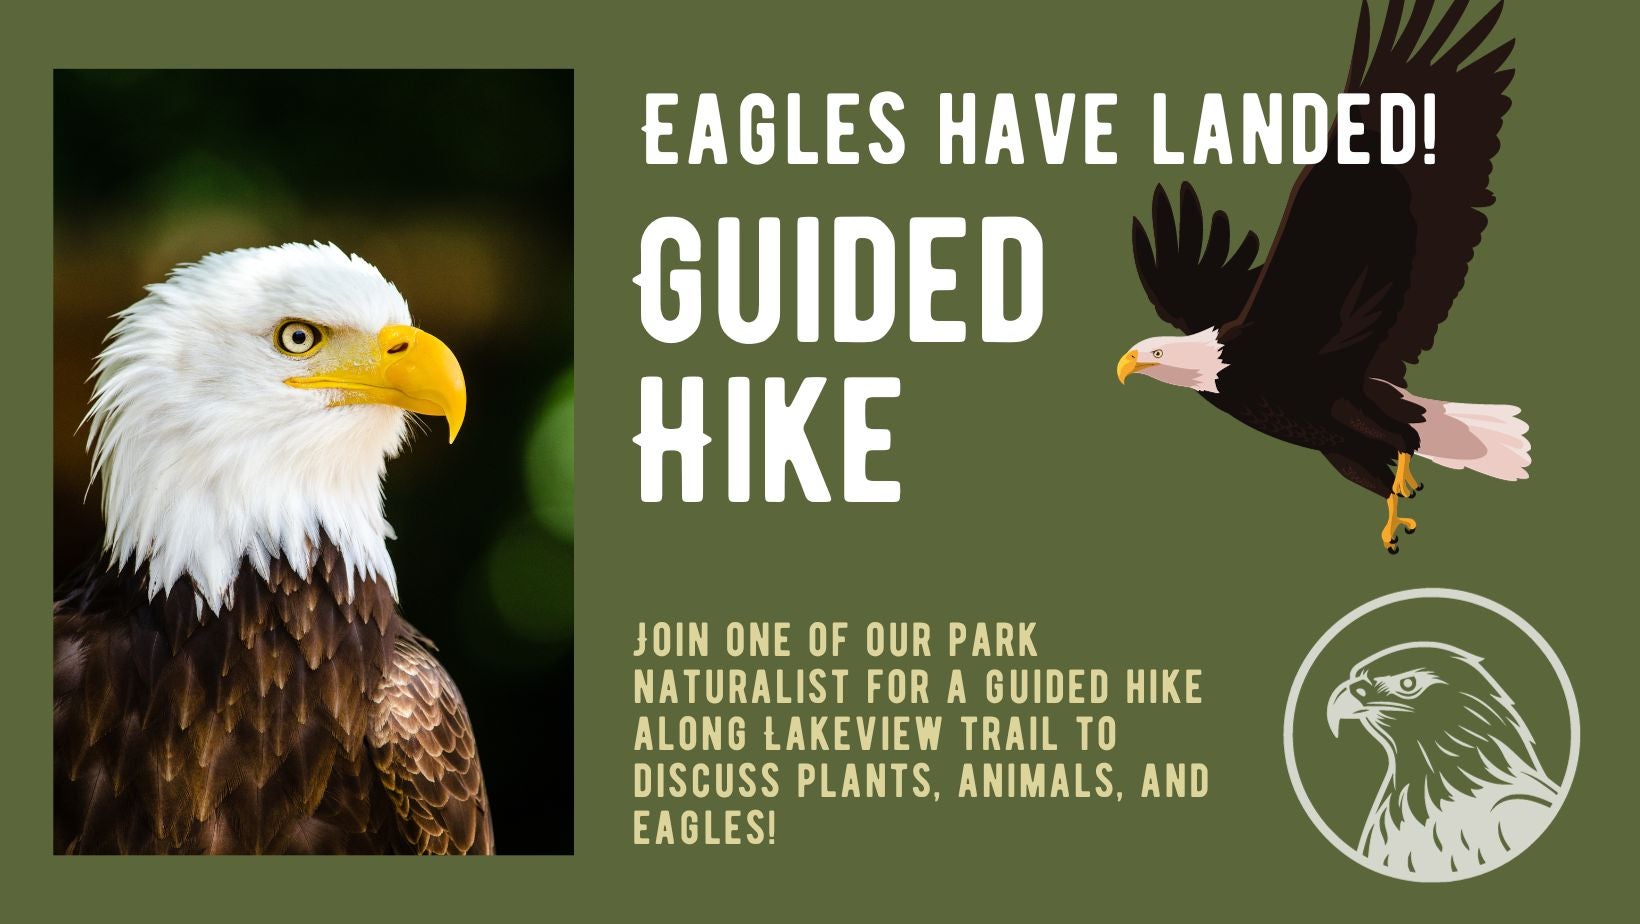 Eagles have landed guided hike